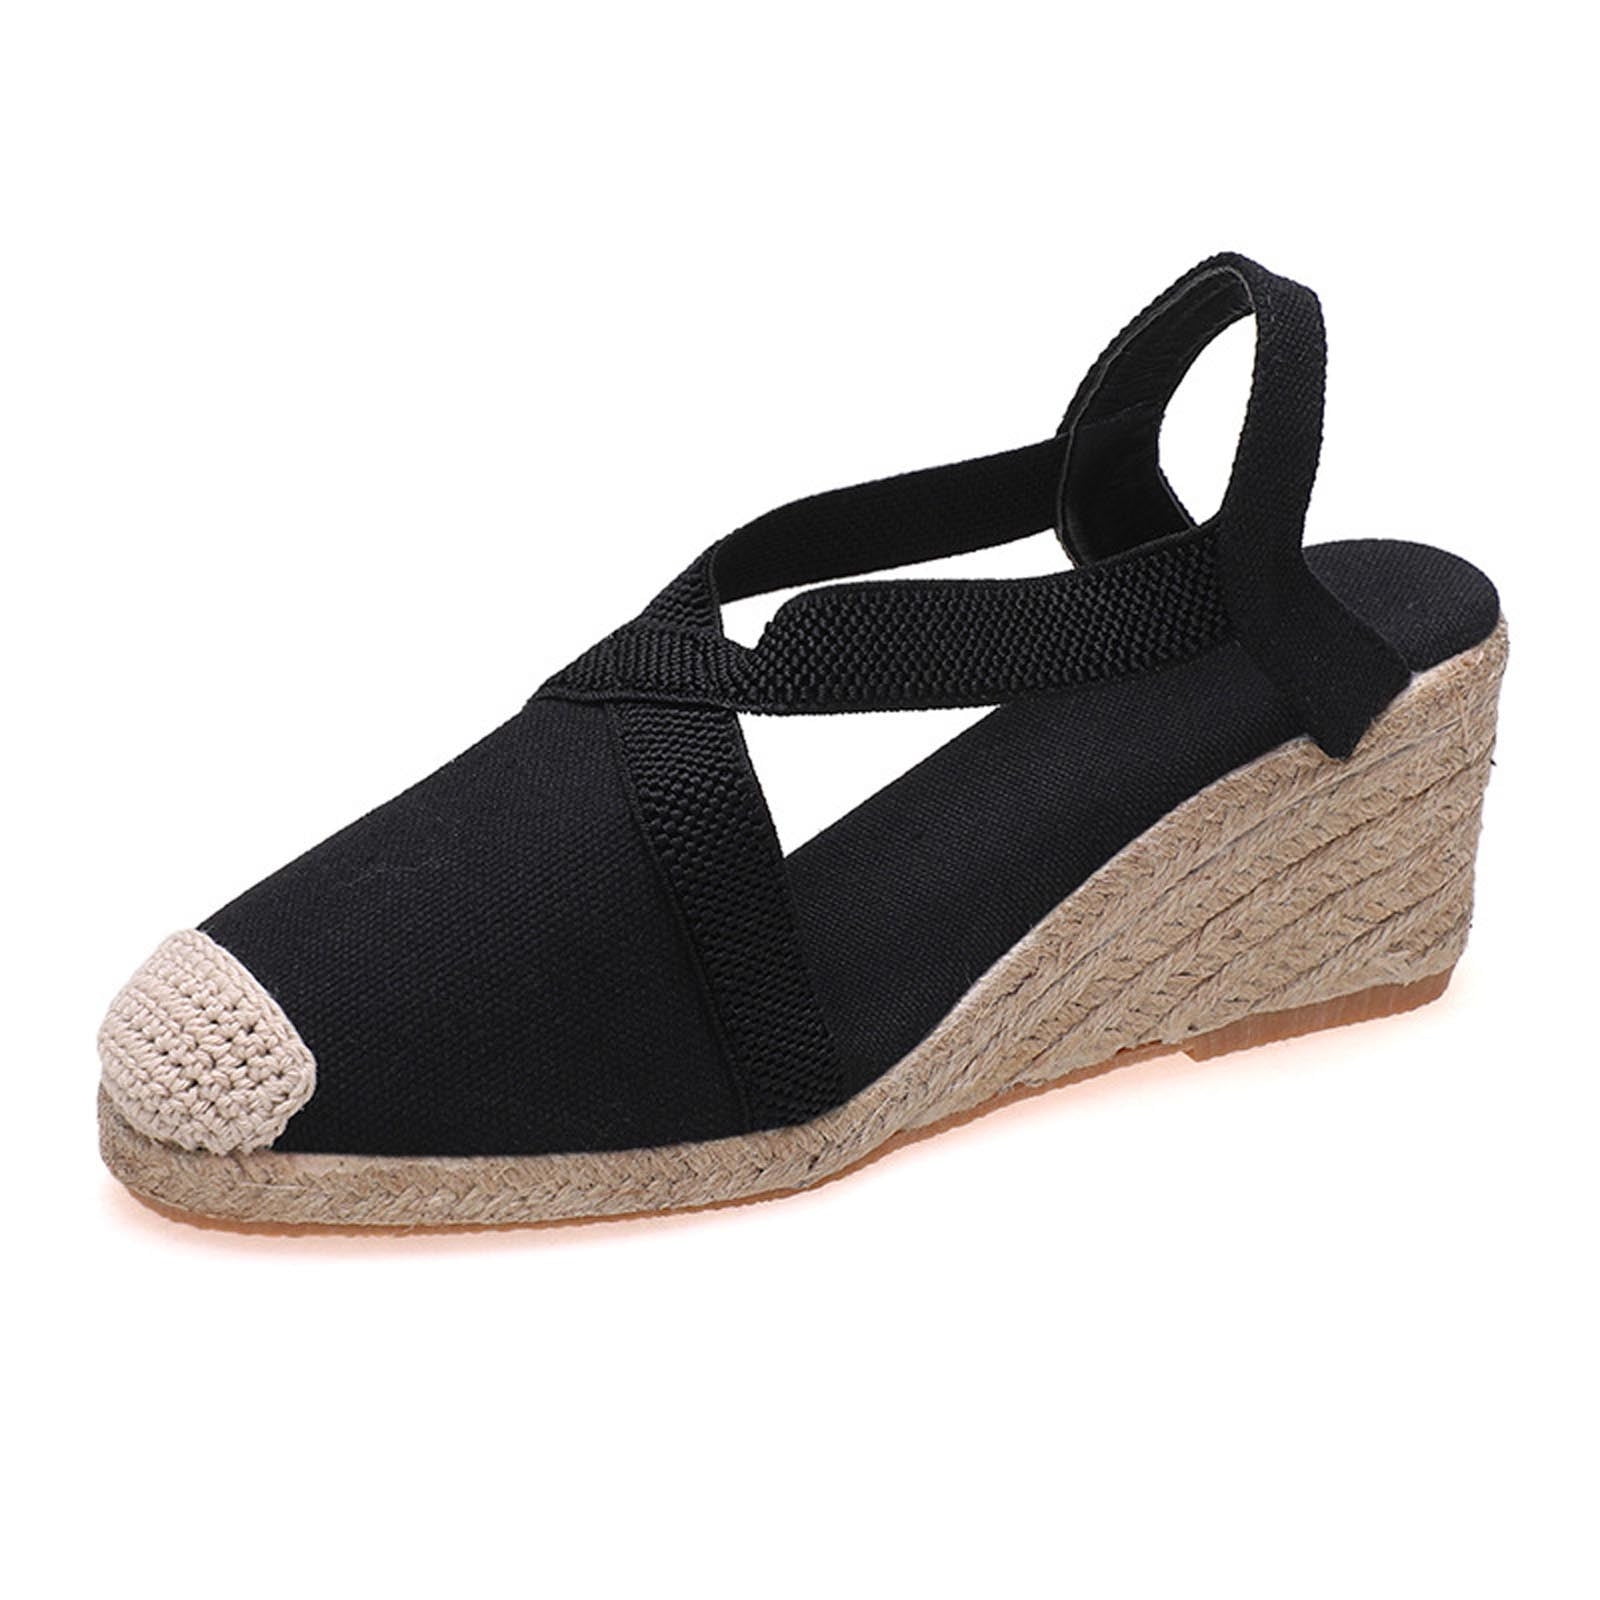 tranfacy Wedges for Women, Fashion Ladies Large Size Wedges Wrapped ...